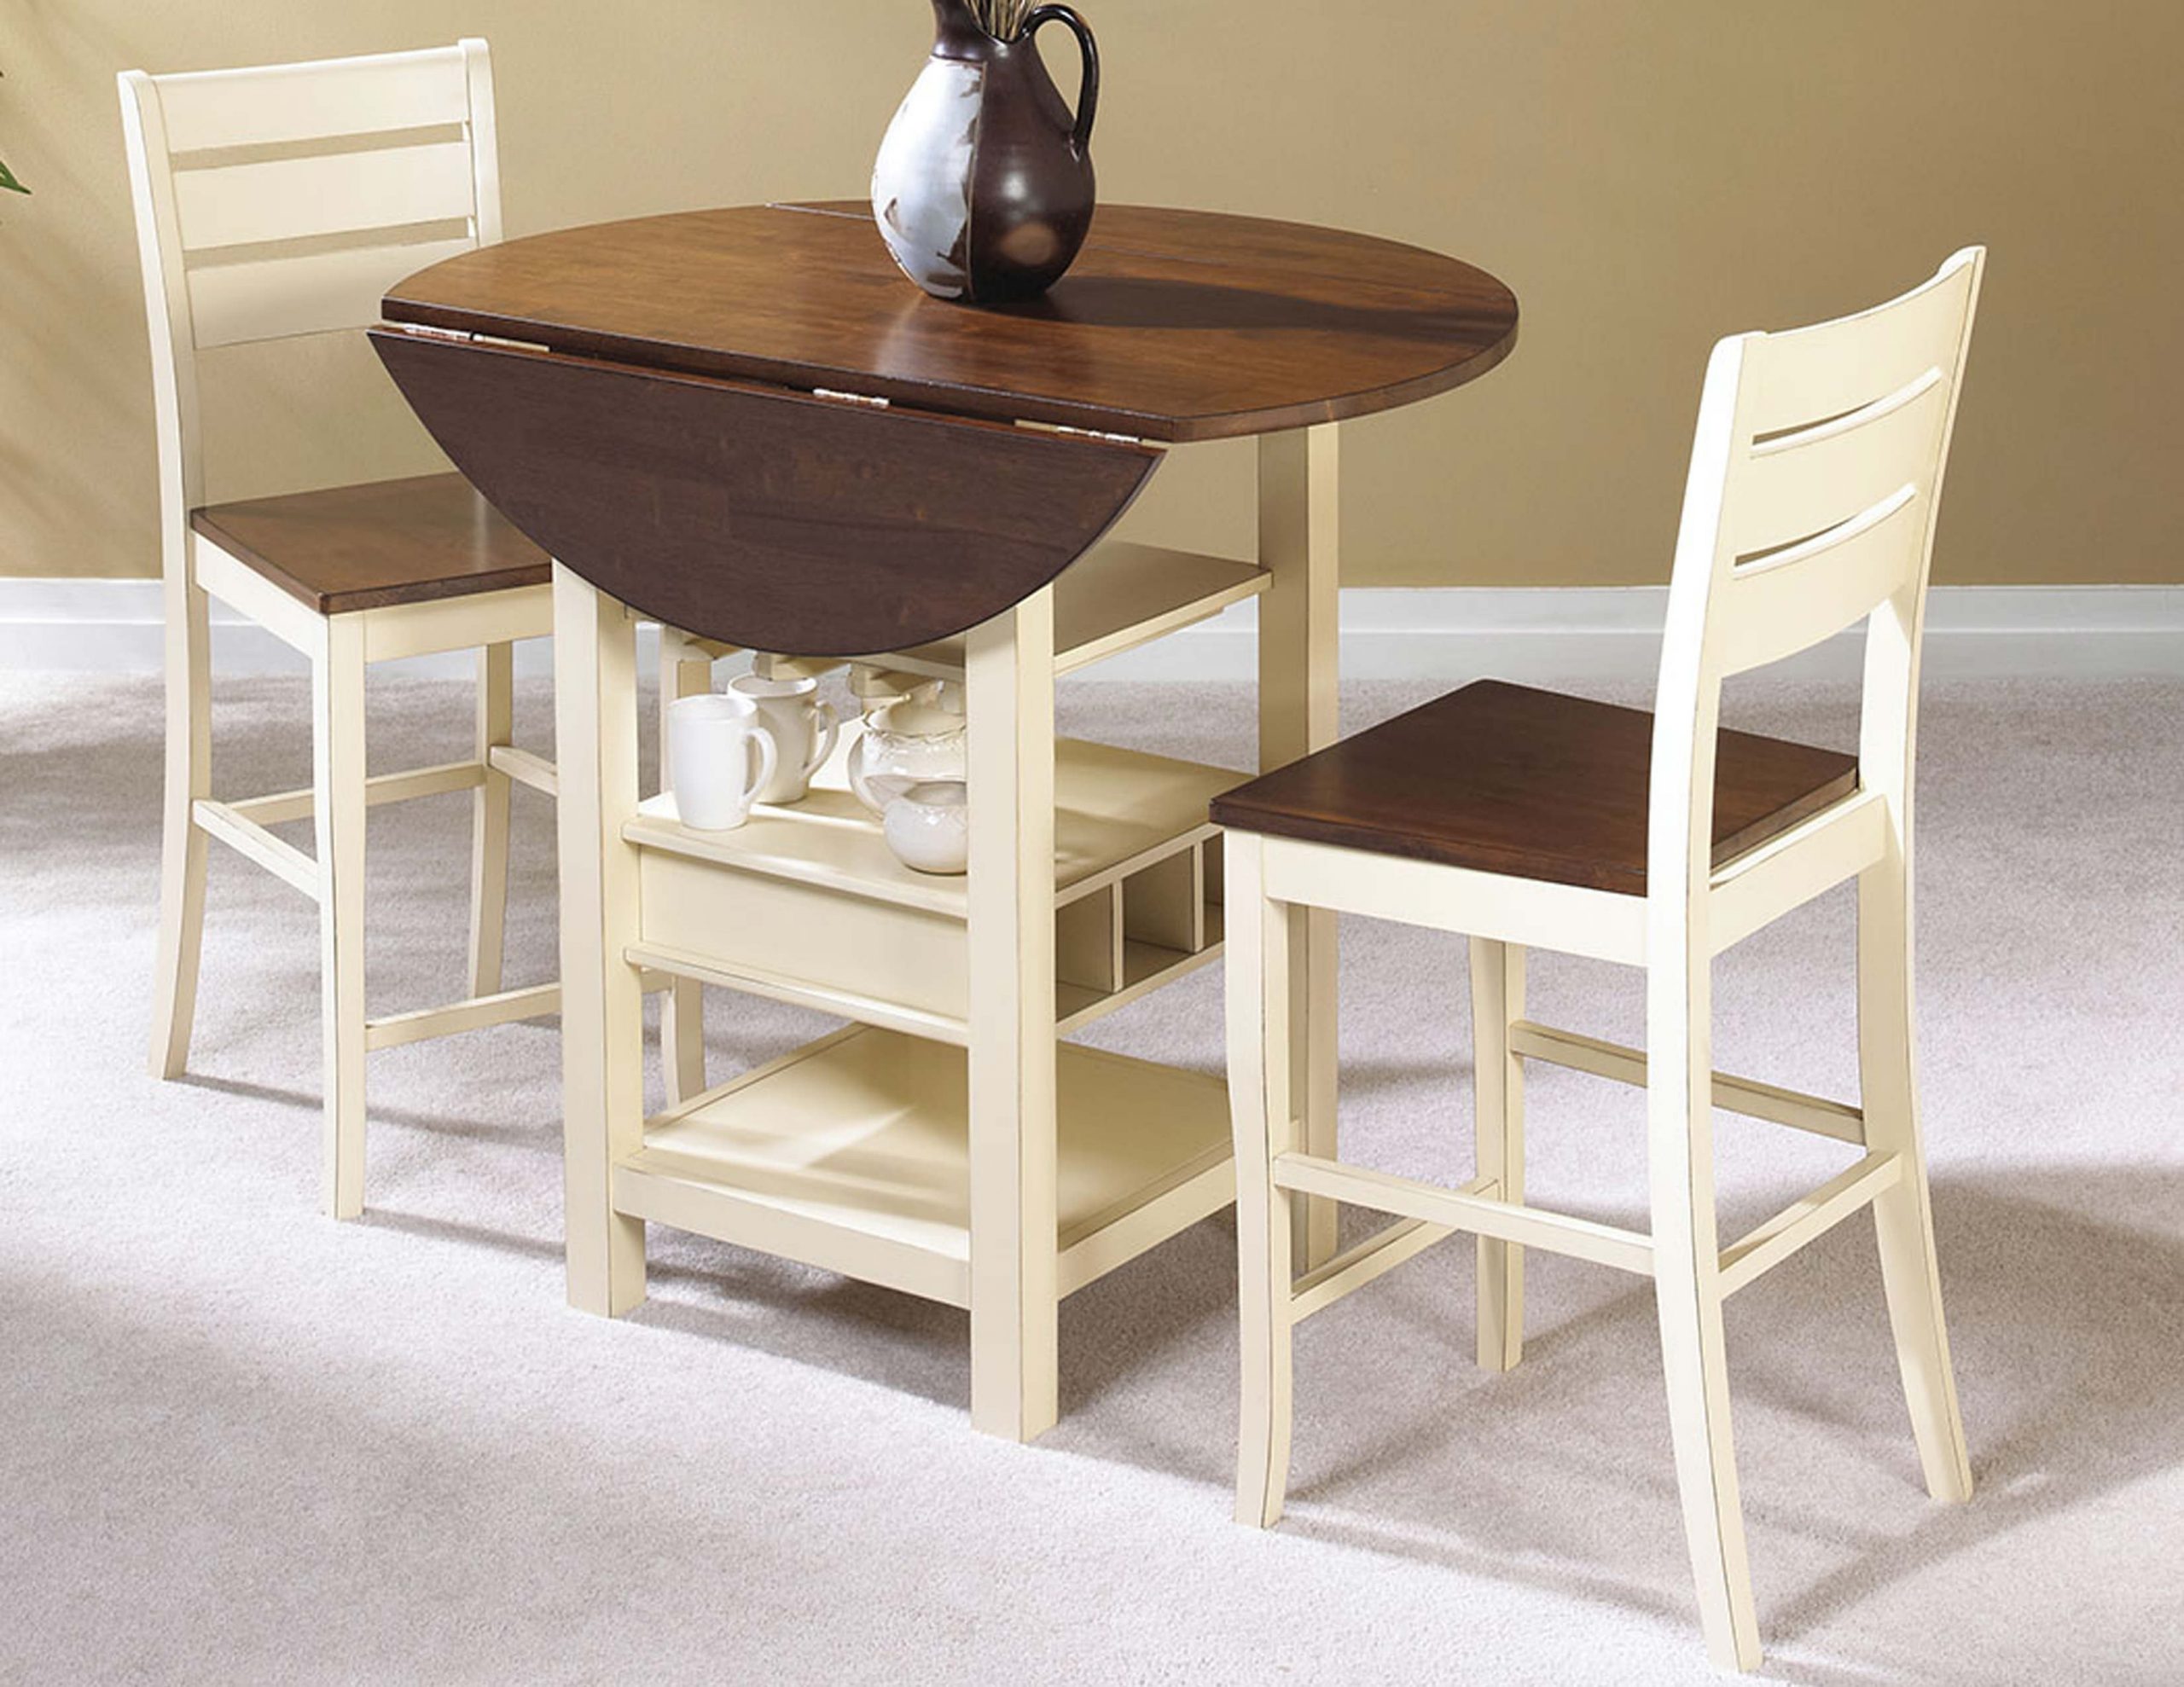 wayfair small folding kitchen table with stools